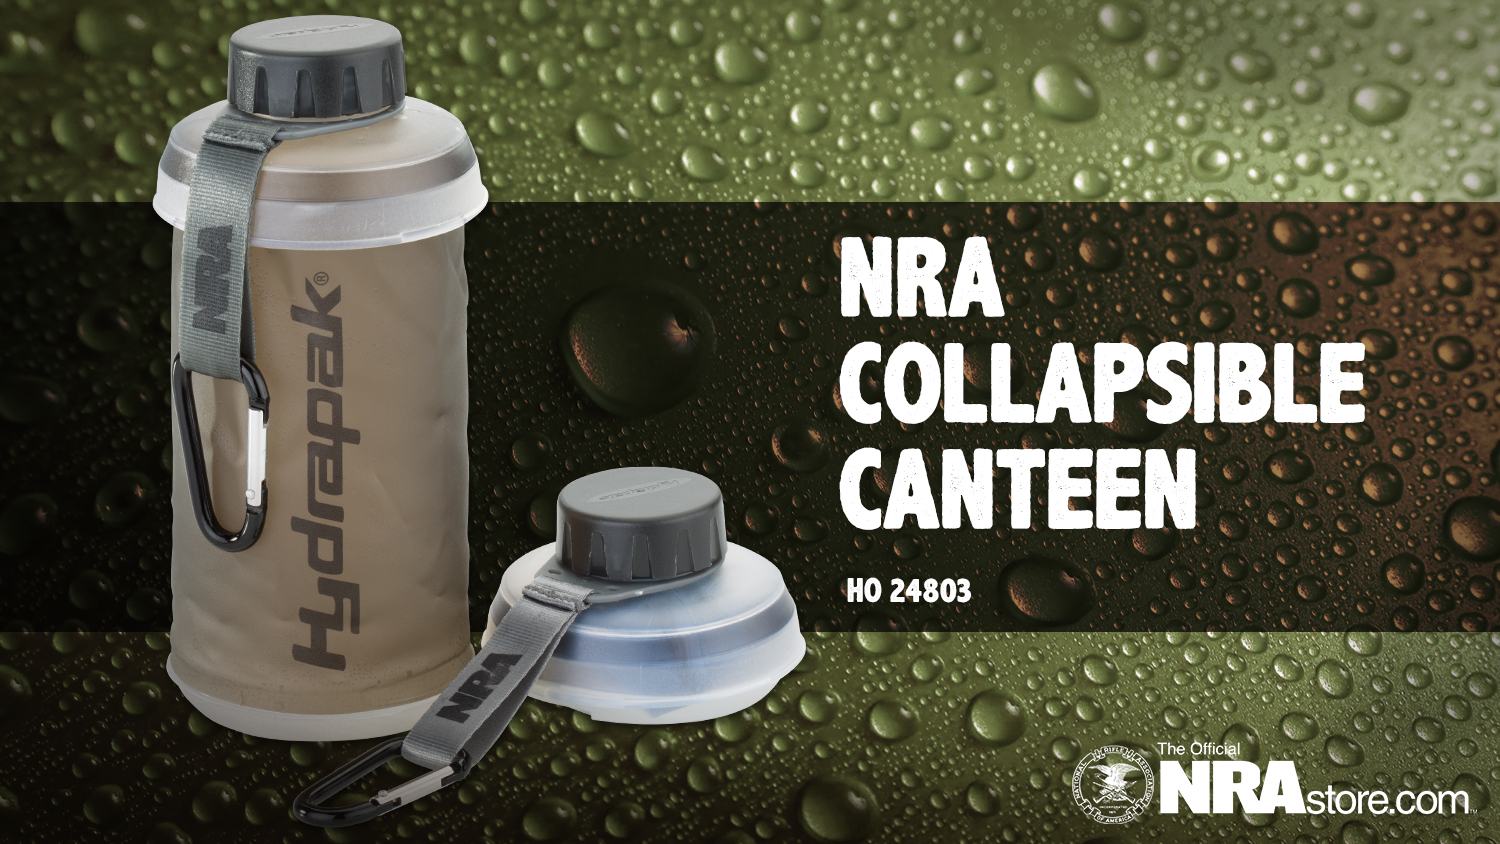 NRA Store Product Highlight: Collapsible Canteen